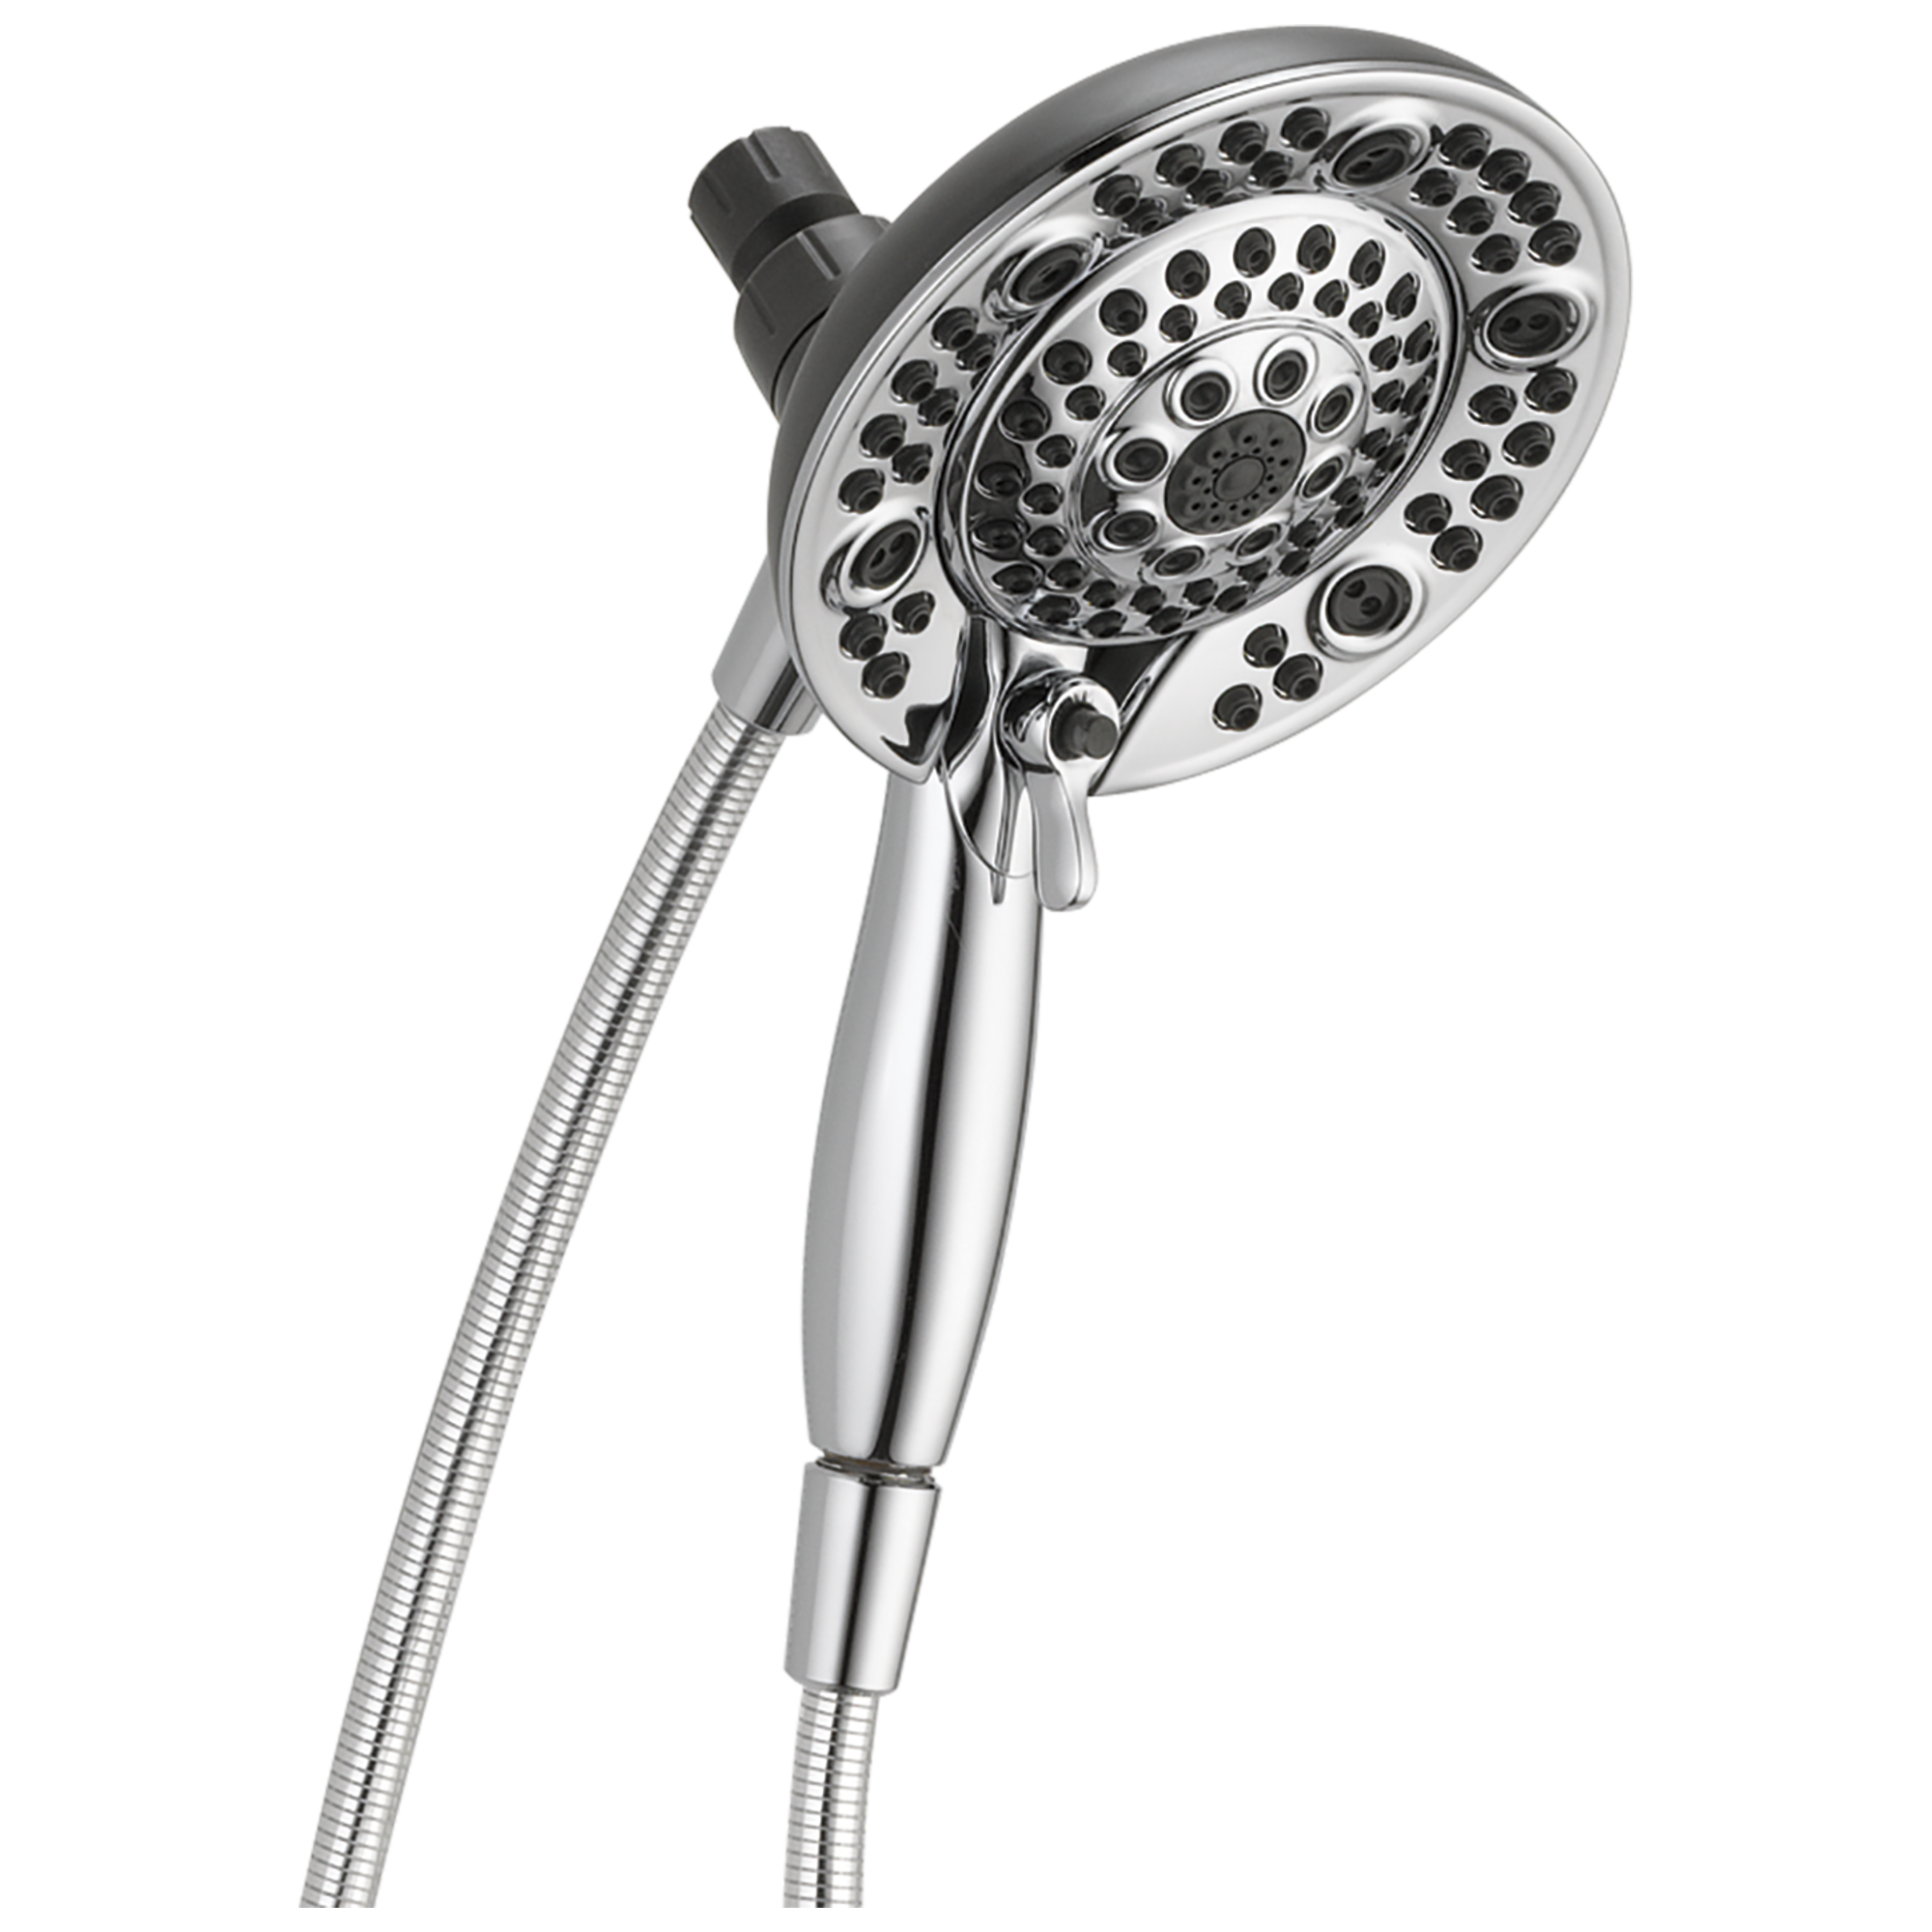 LDR 502 1100 Water Saving Showerhead With Push Button Flow Control Chrome for sale online 